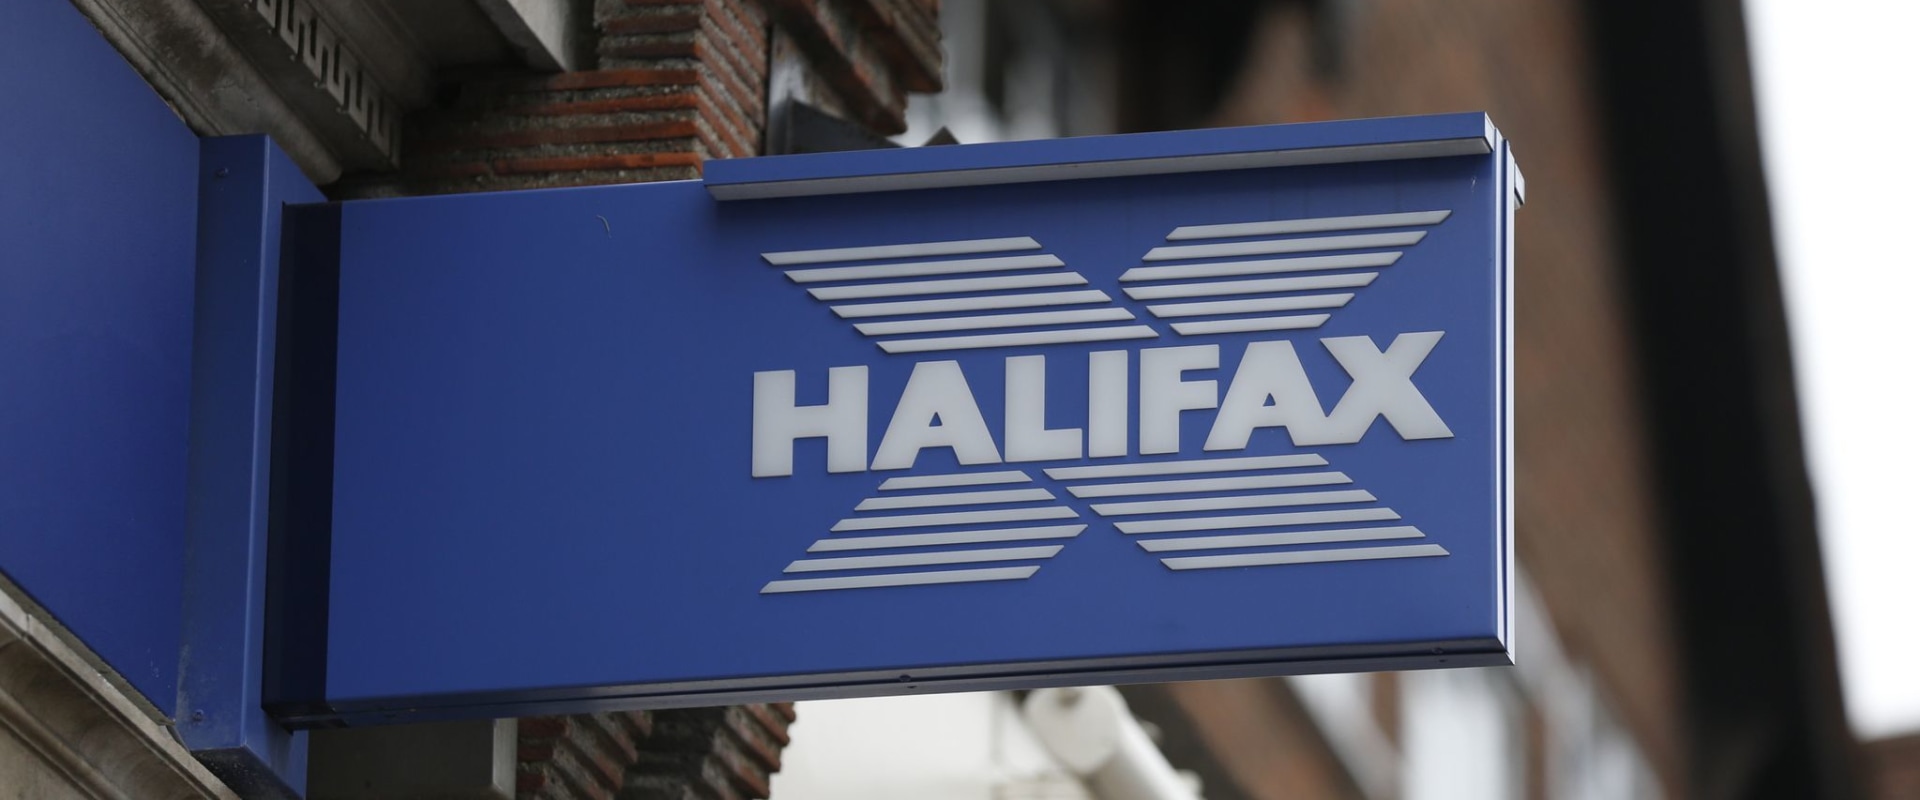 Comparing Halifax Mortgage Rates to Other Lenders